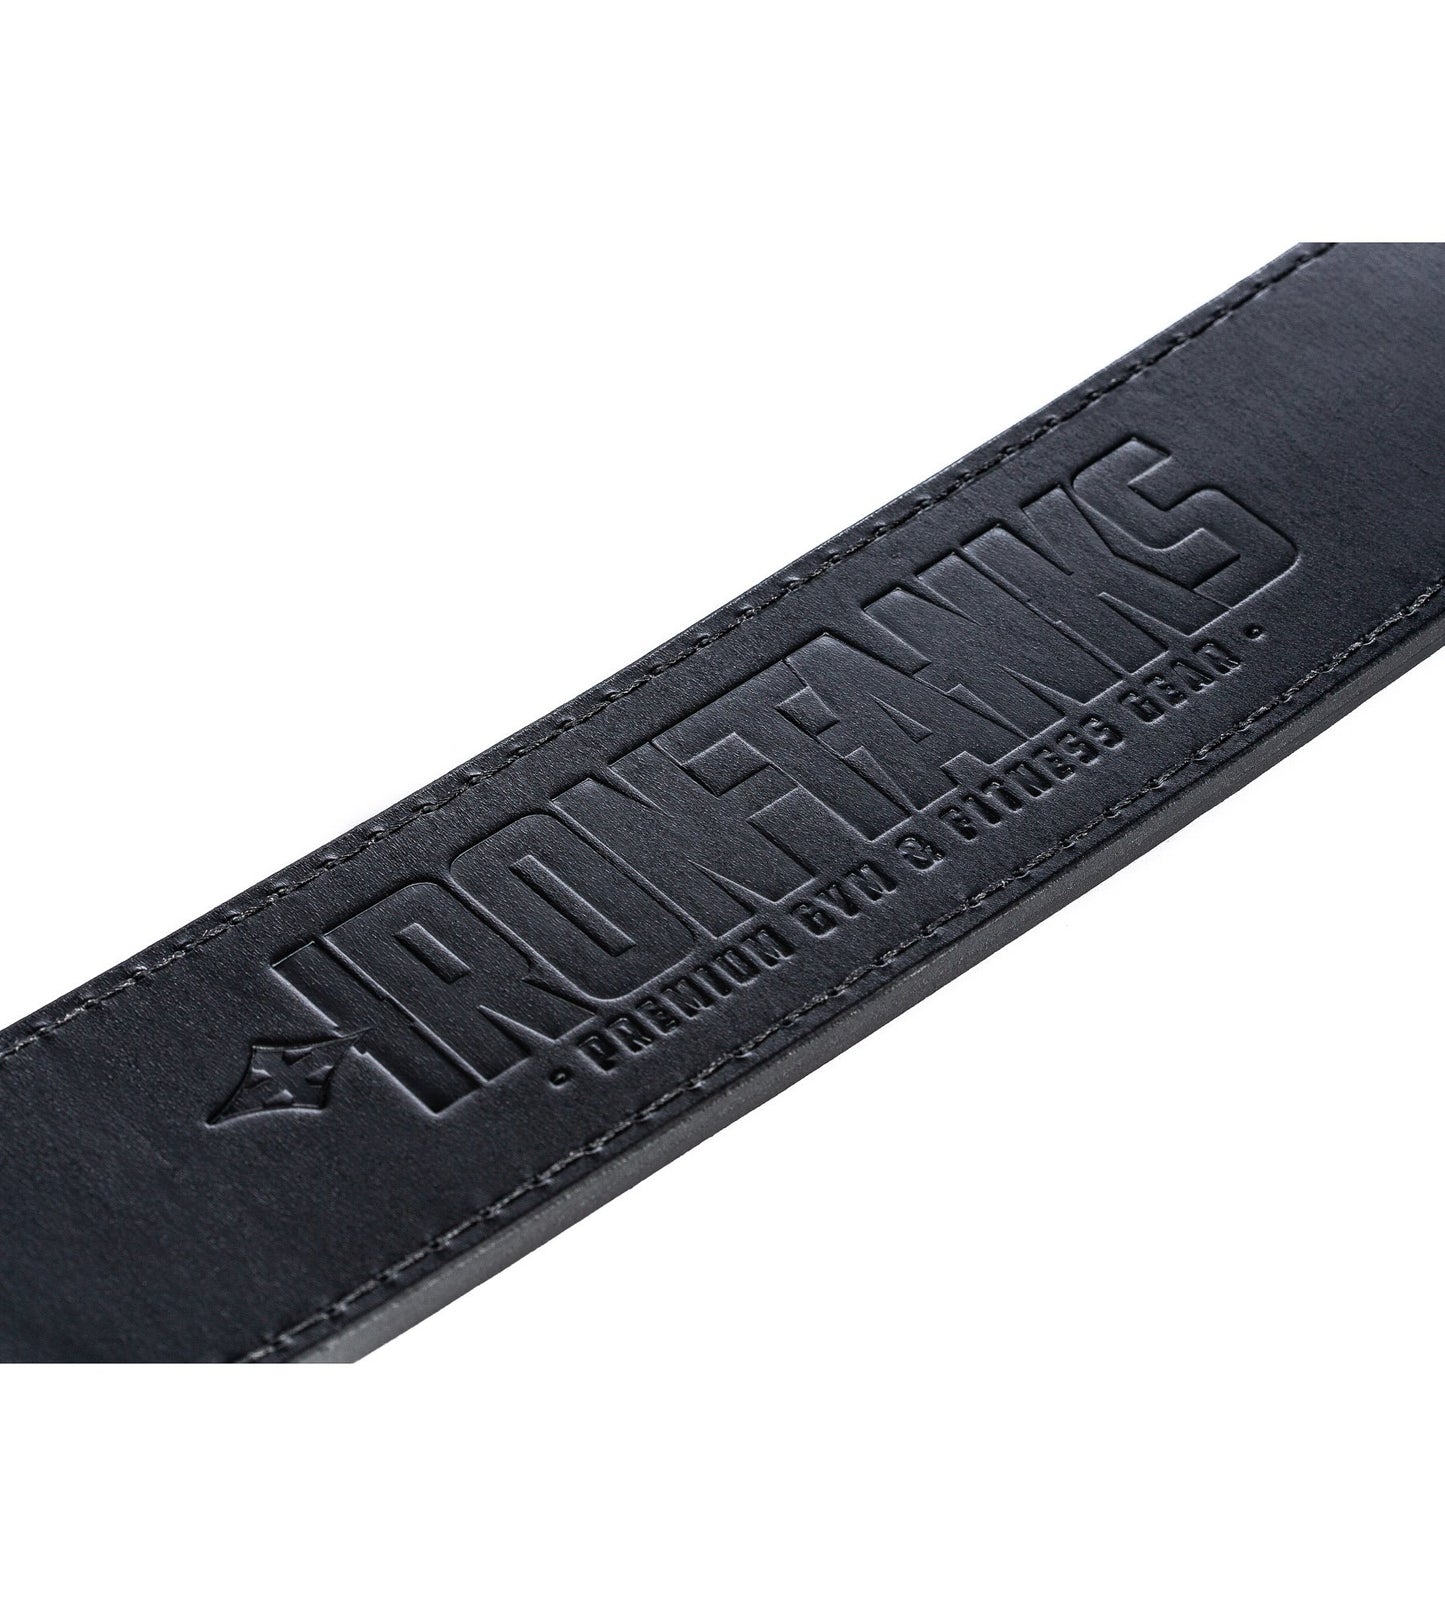 Iron Tanks Hellraiser Powerlifting Lever Belt - 10mm/13mm thick - IPF APPROVED (NO LEVER)